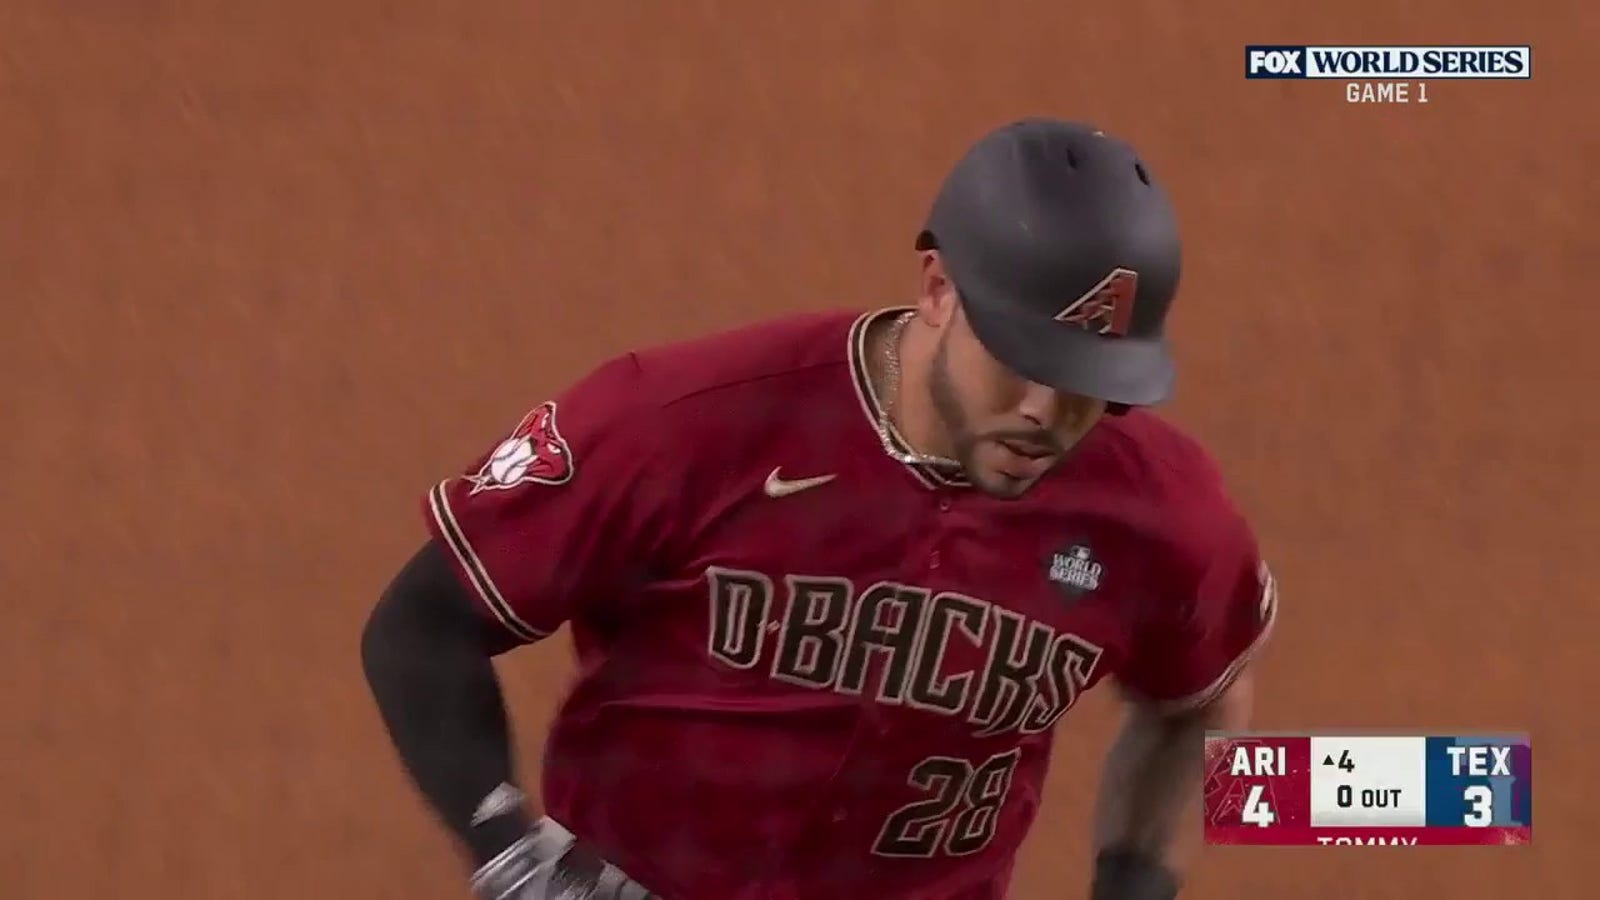 Tommy Pham crushes a solo home run to give Diamondbacks a lead over Rangers